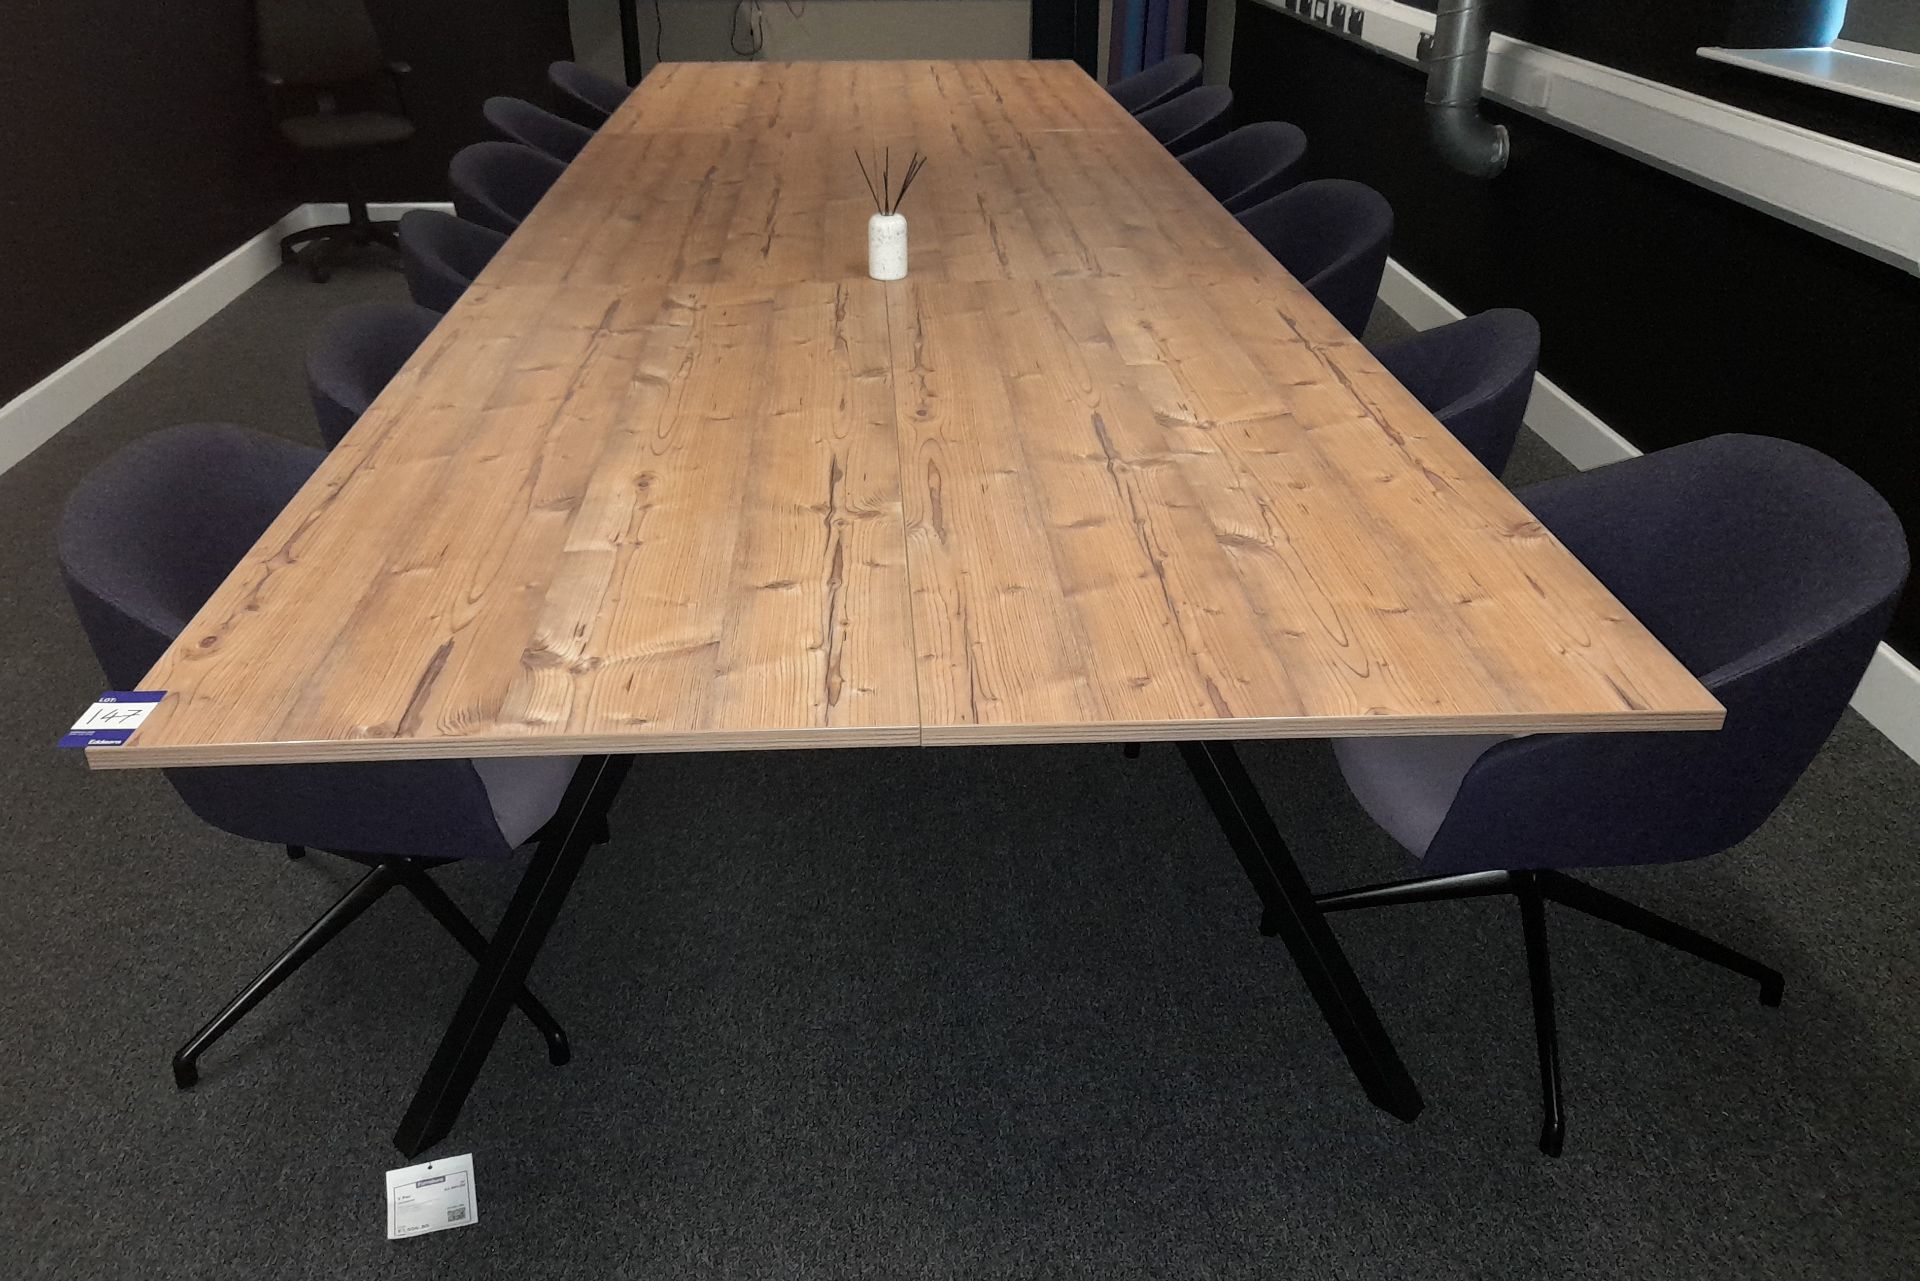 6 x Section boardroom table (Approx. 1600 x 800), with 12 x Swivel tub chairs, located to